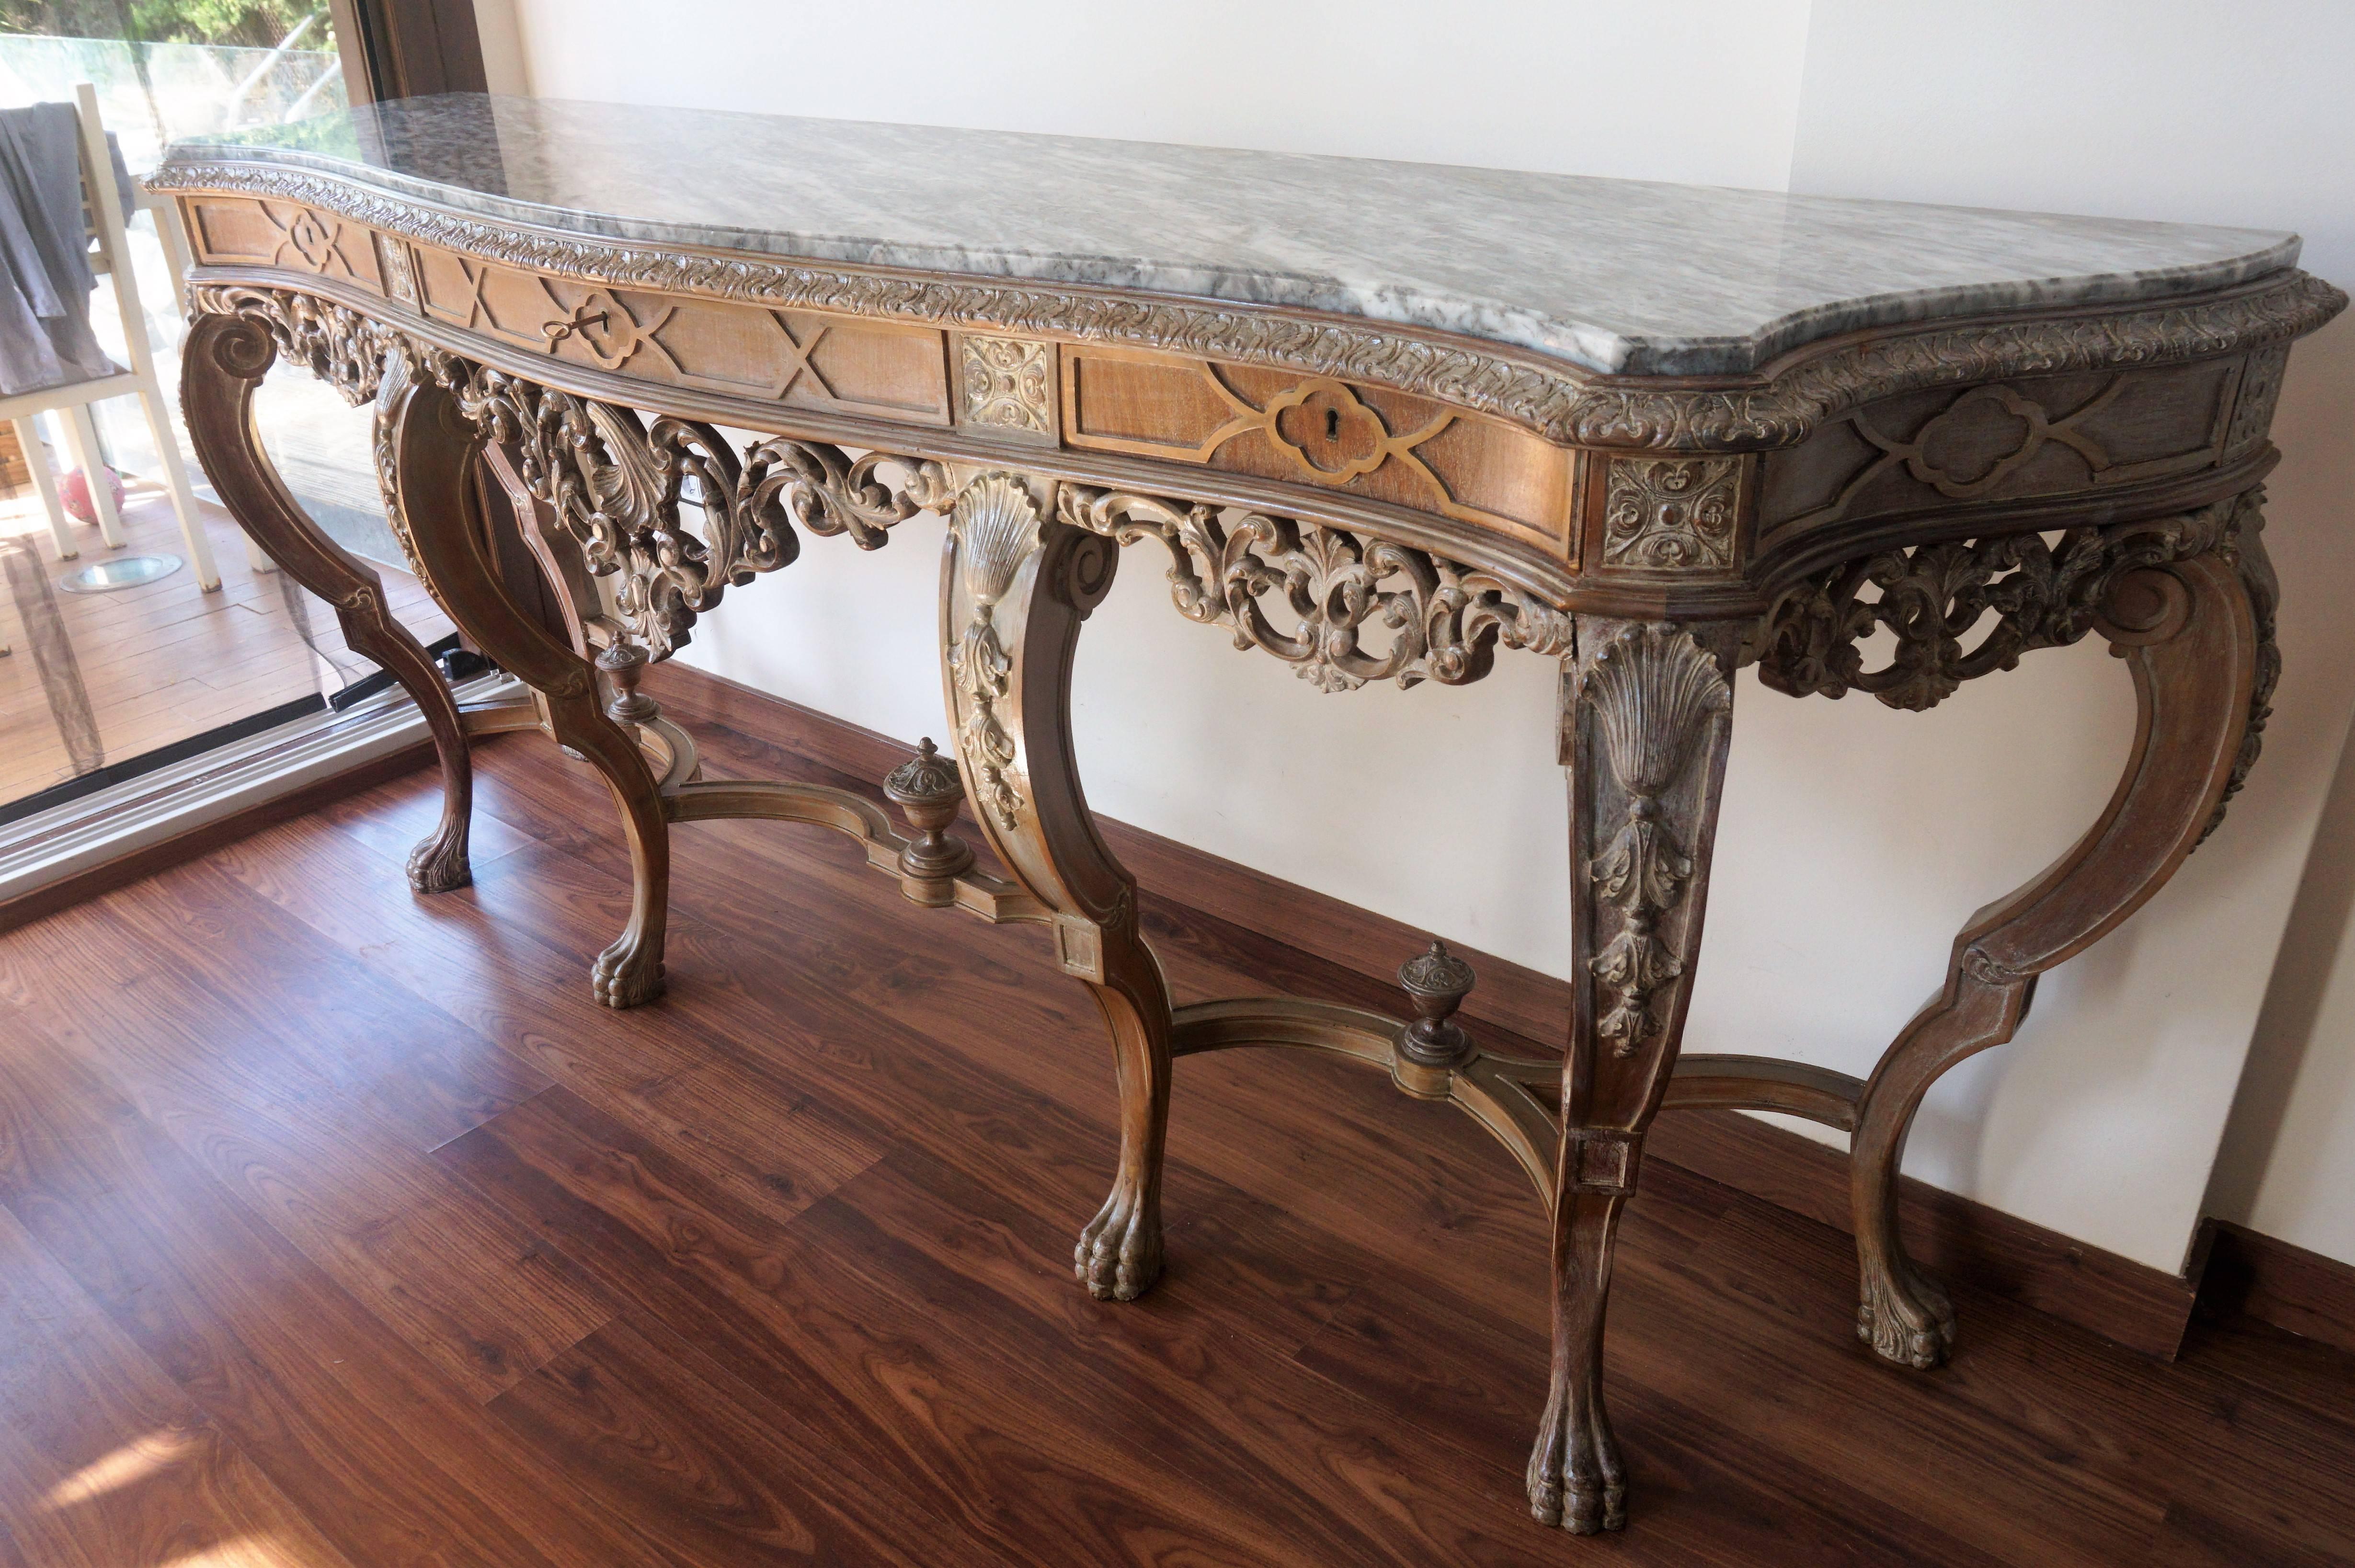 Spanish console table with marble top by Mariano Garcia.

